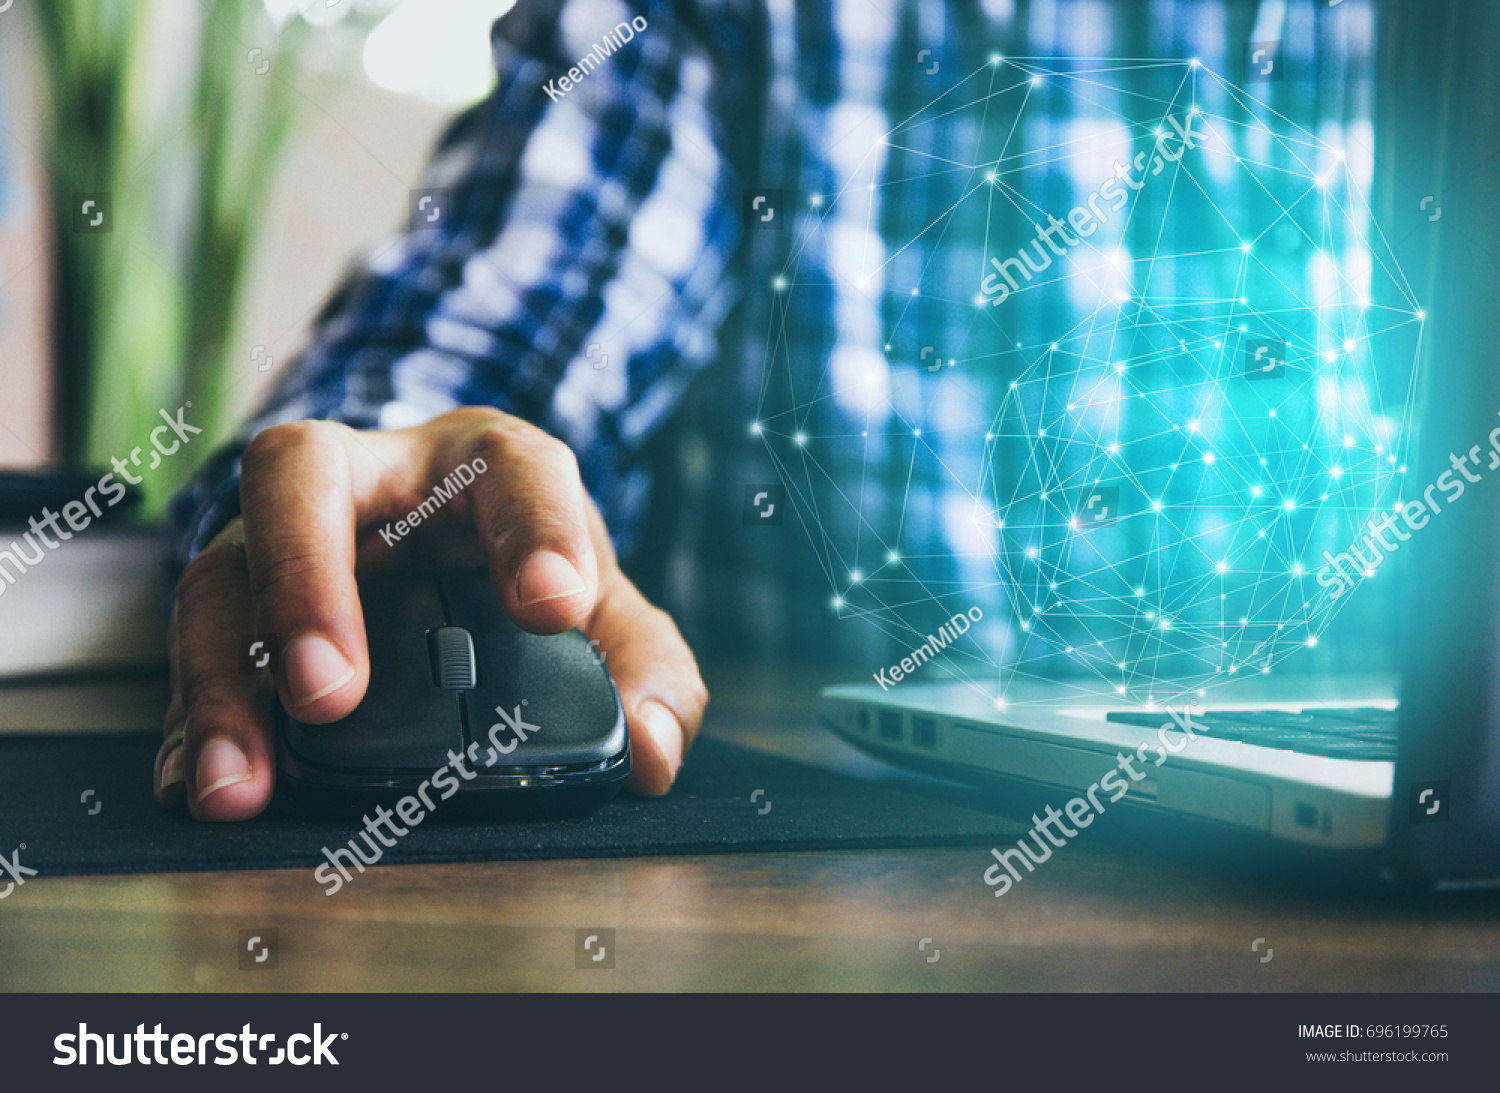 mouse click, man hand with mouse and laptop #696199765